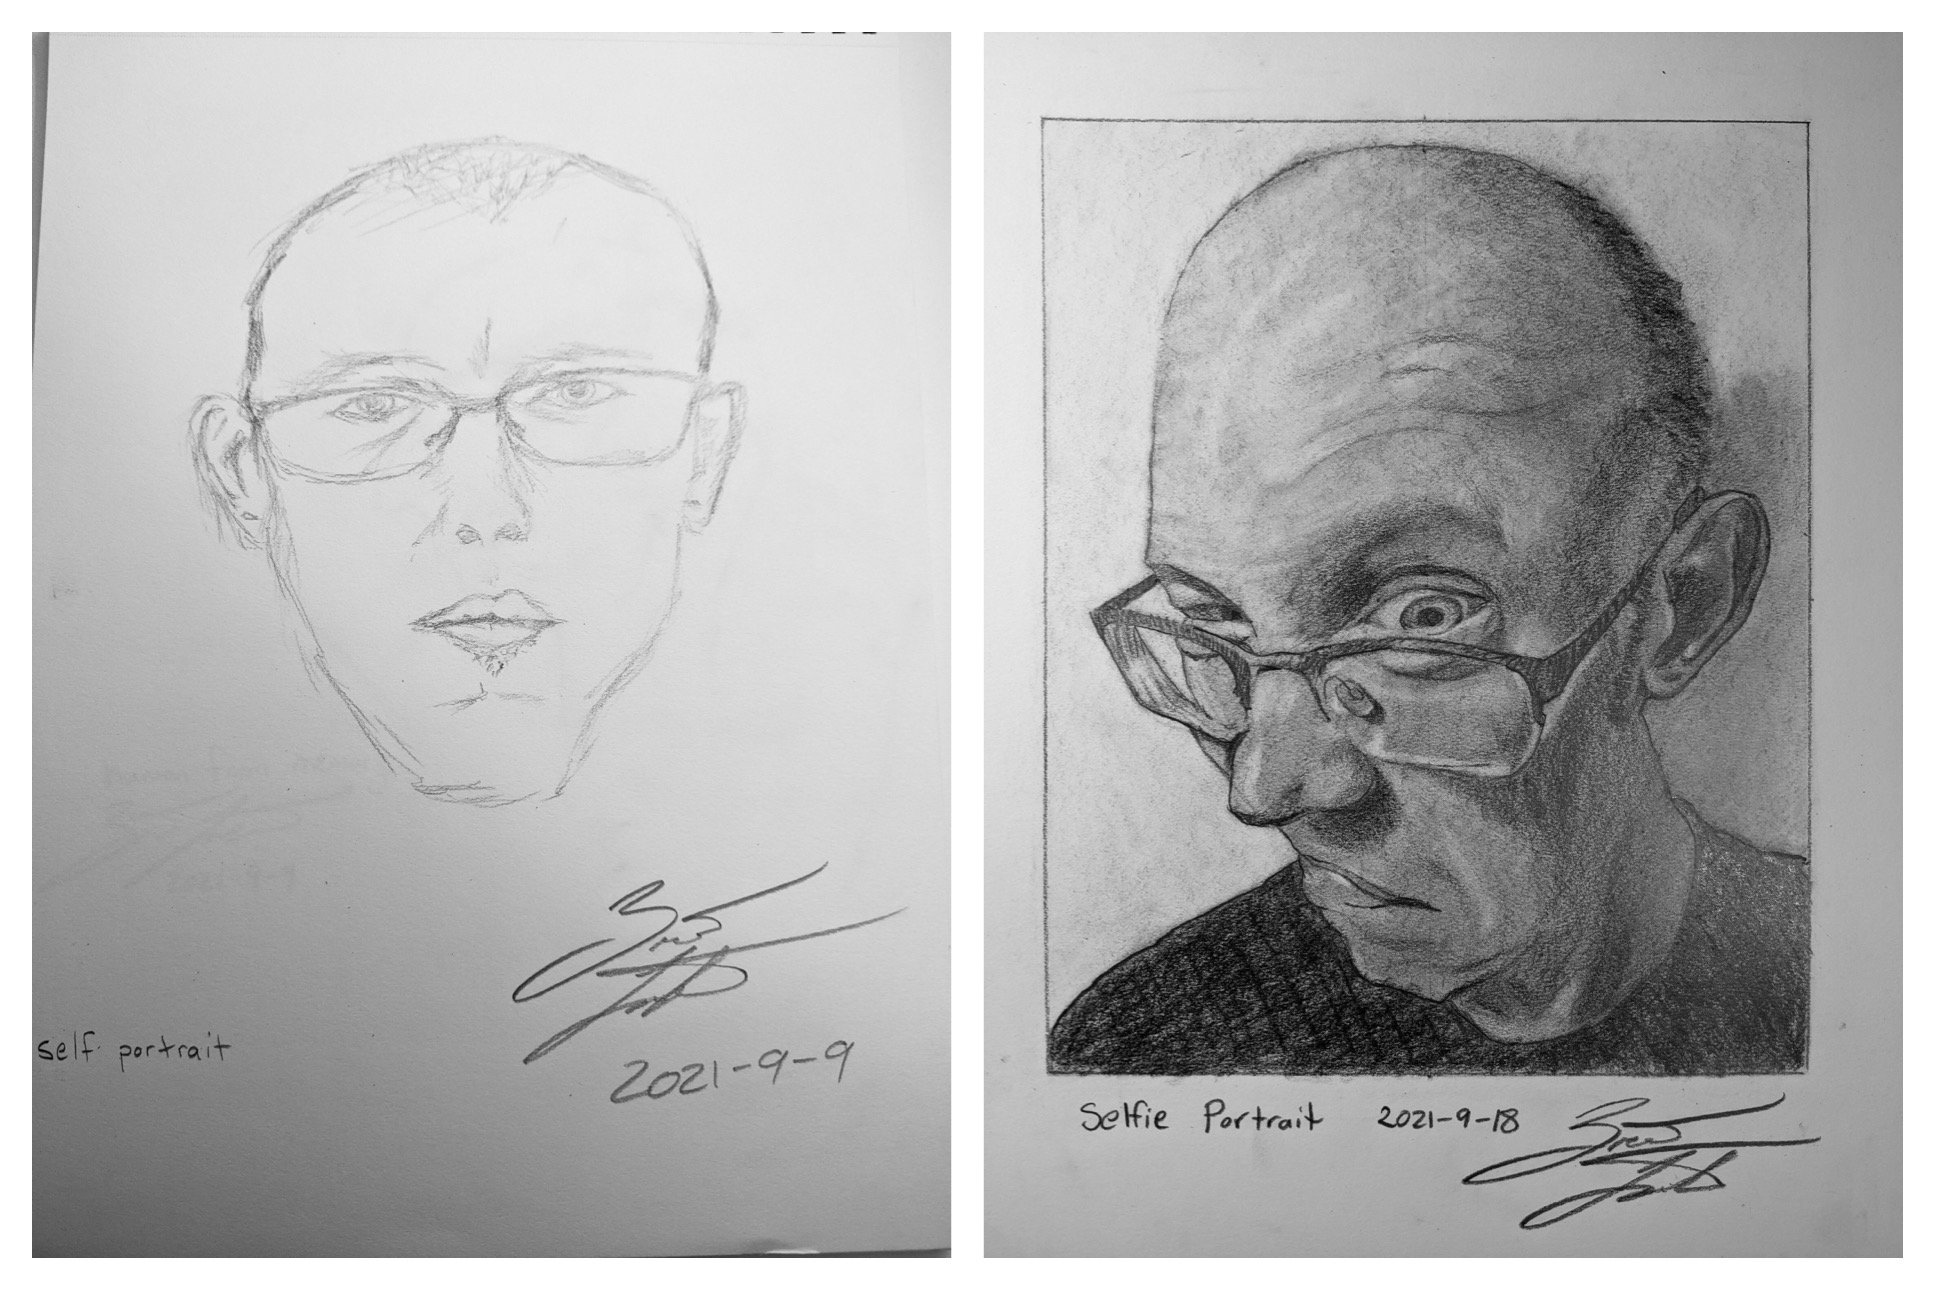 Brenton's Before and After Self Portrait Drawings September 13-18, 2021